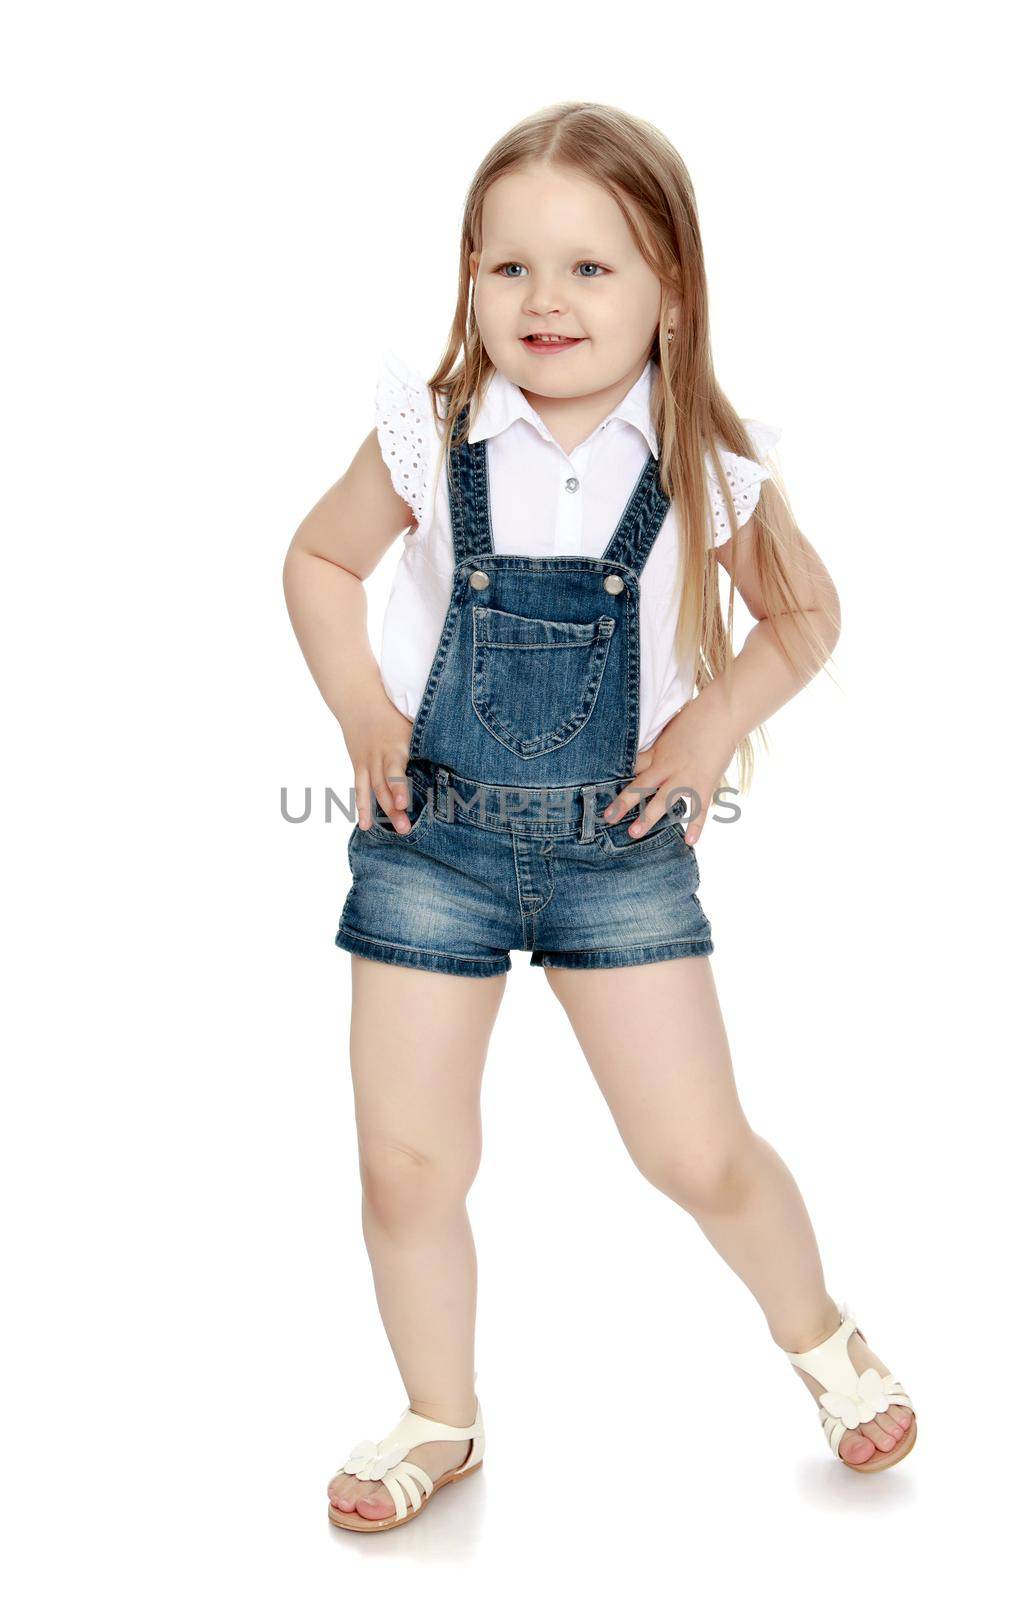 Beautiful little girl with long blonde hair below the belt in short denim jumpsuit. Girl holding hands on waist - Isolated on white background